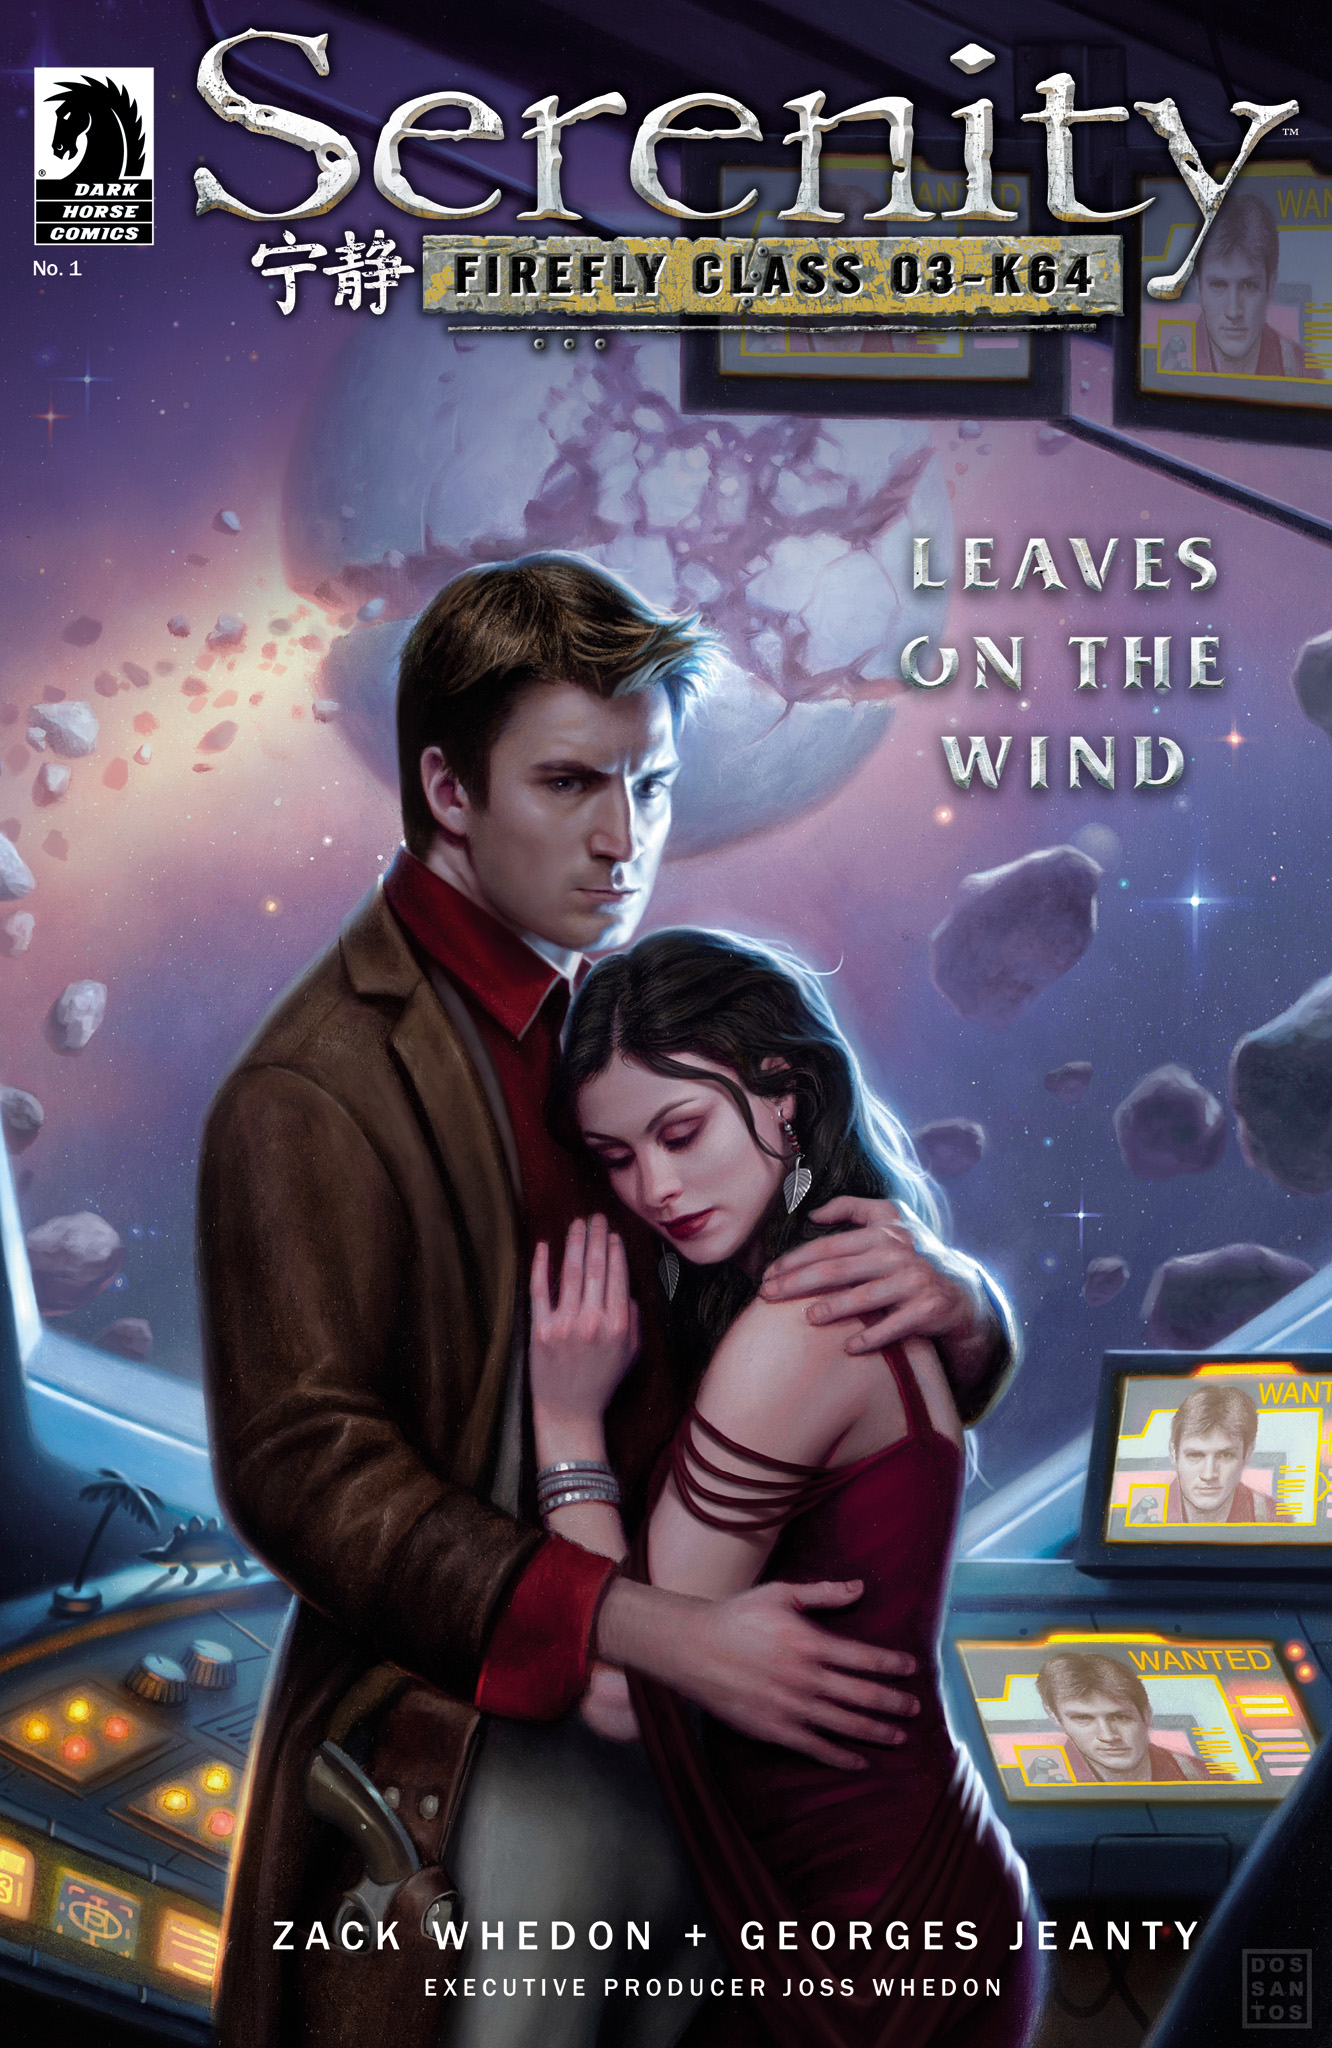 Read online Serenity: Firefly Class 03-K64  Leaves on the Wind comic -  Issue #1 - 1